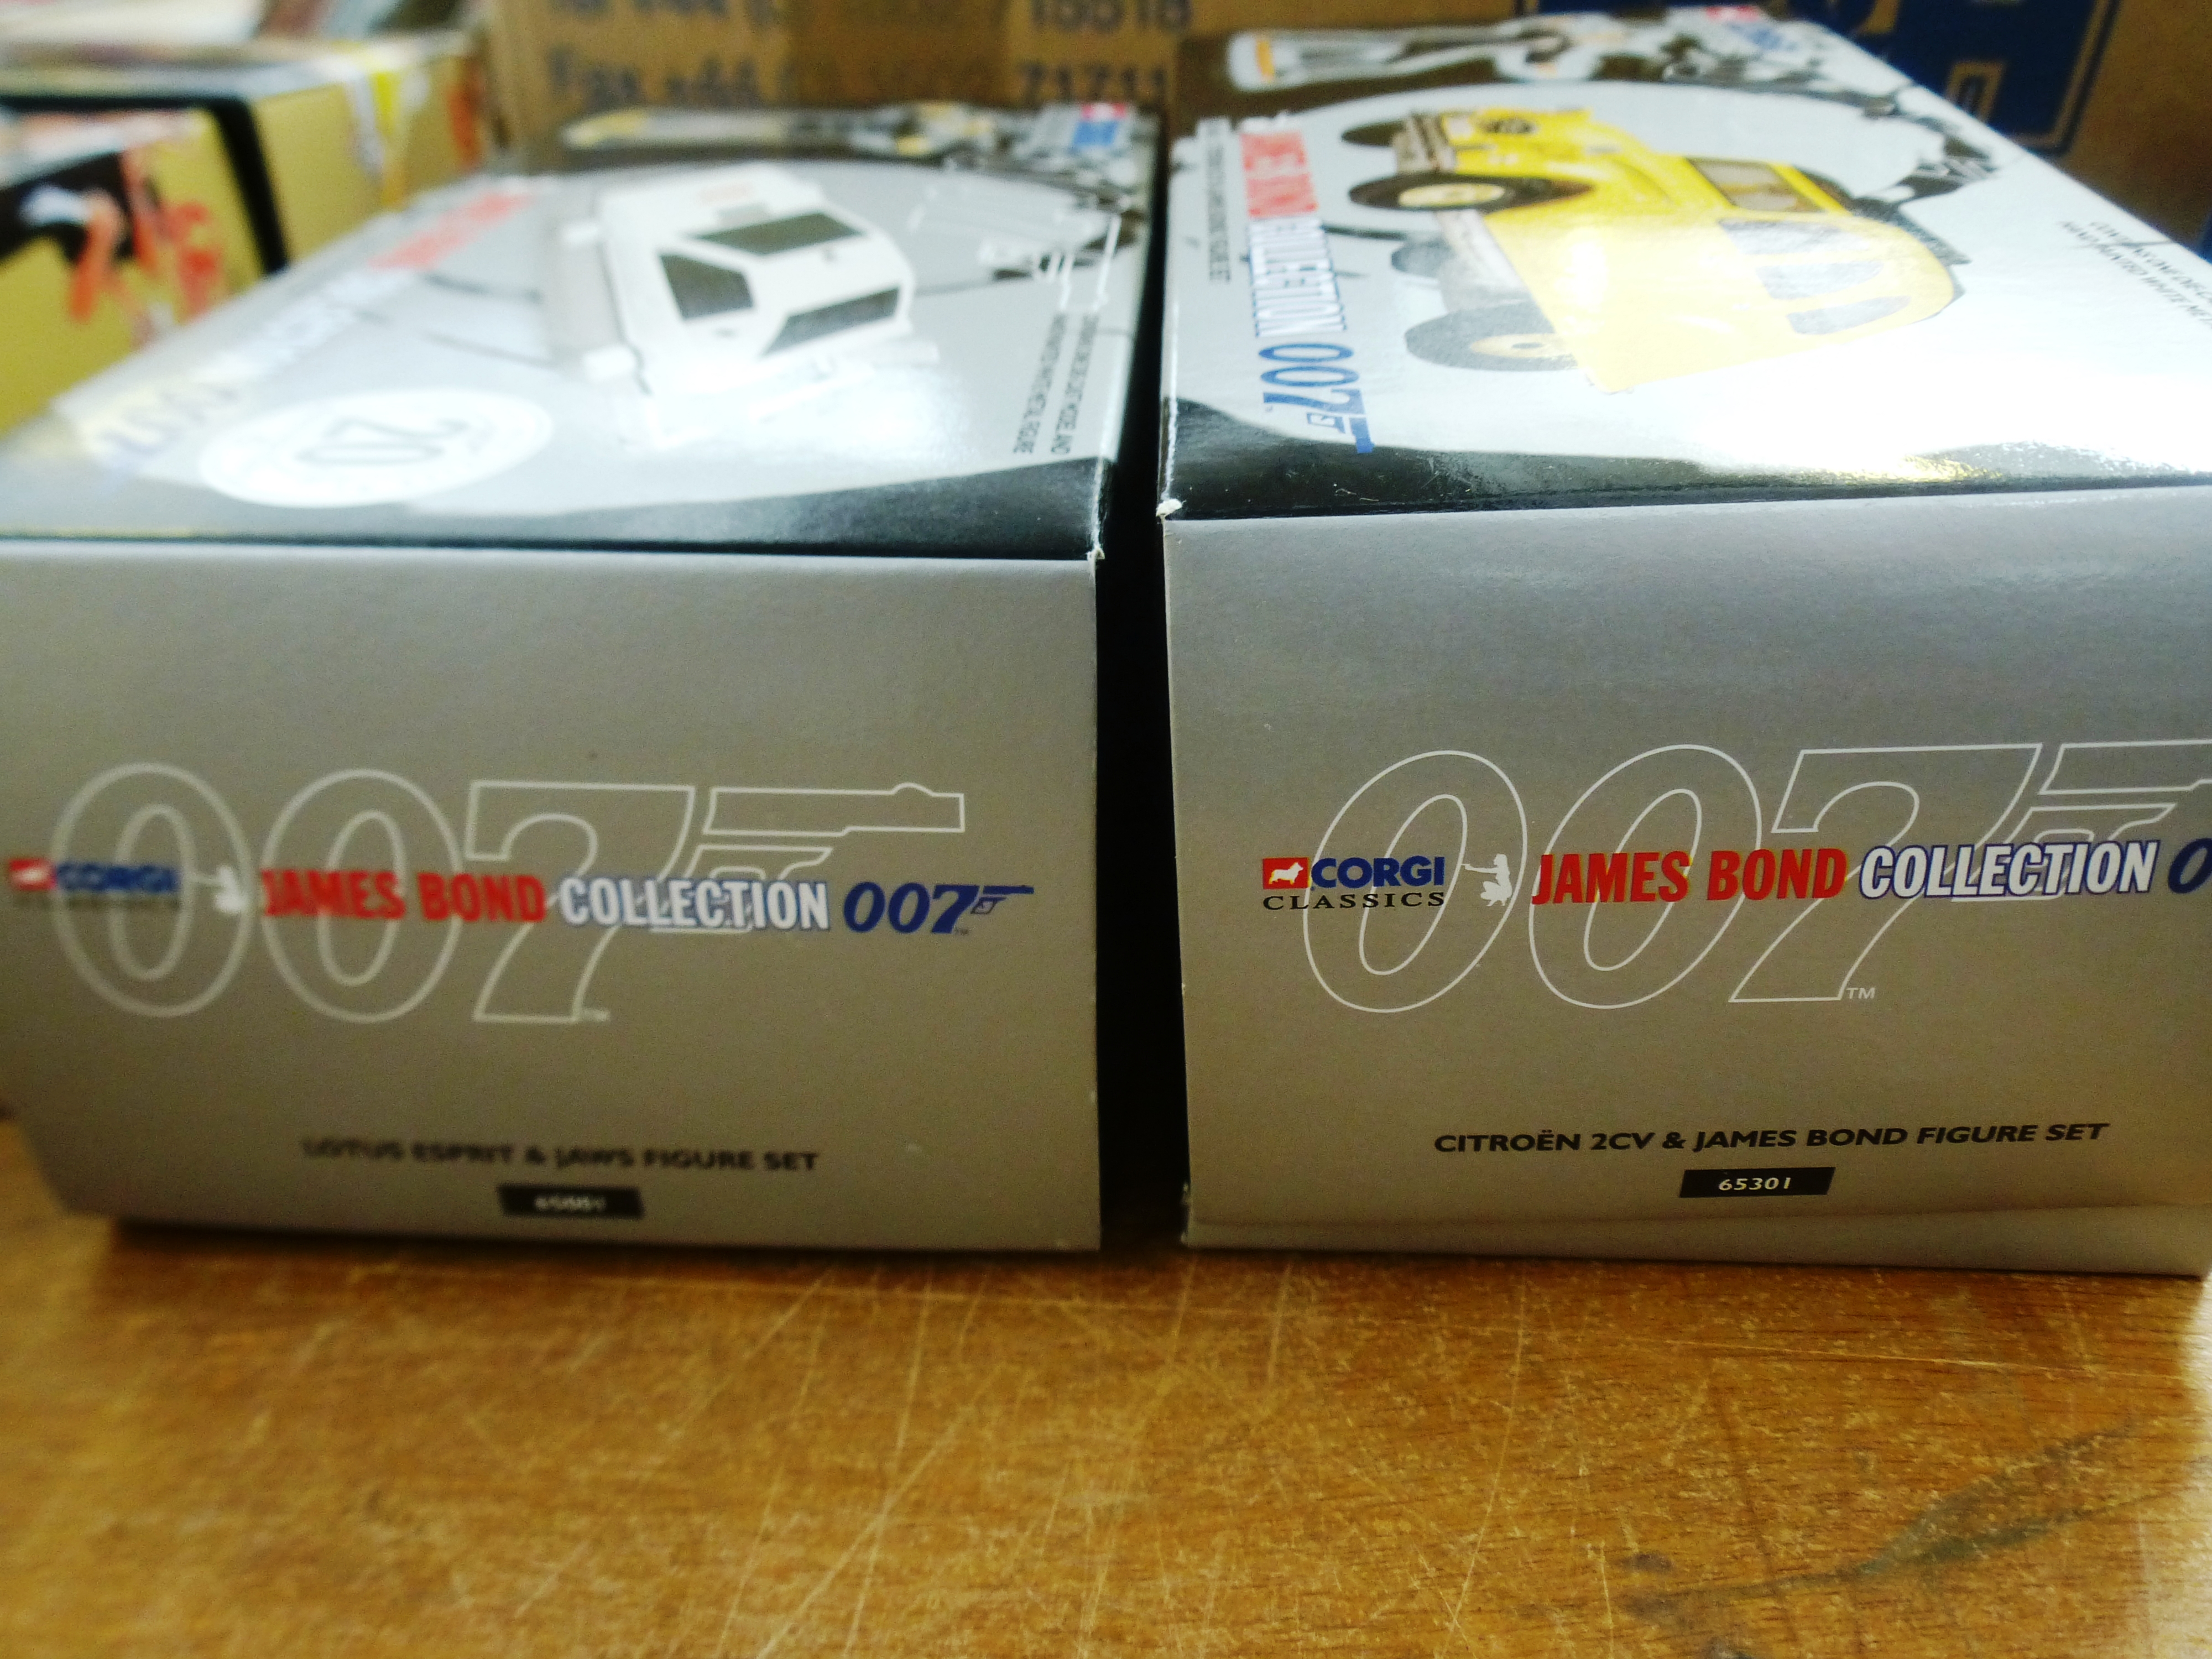 4 BOXED JAMES BOND COLLECTION SETS - 04201, 65101, 65001 AND 65301 - Image 3 of 9